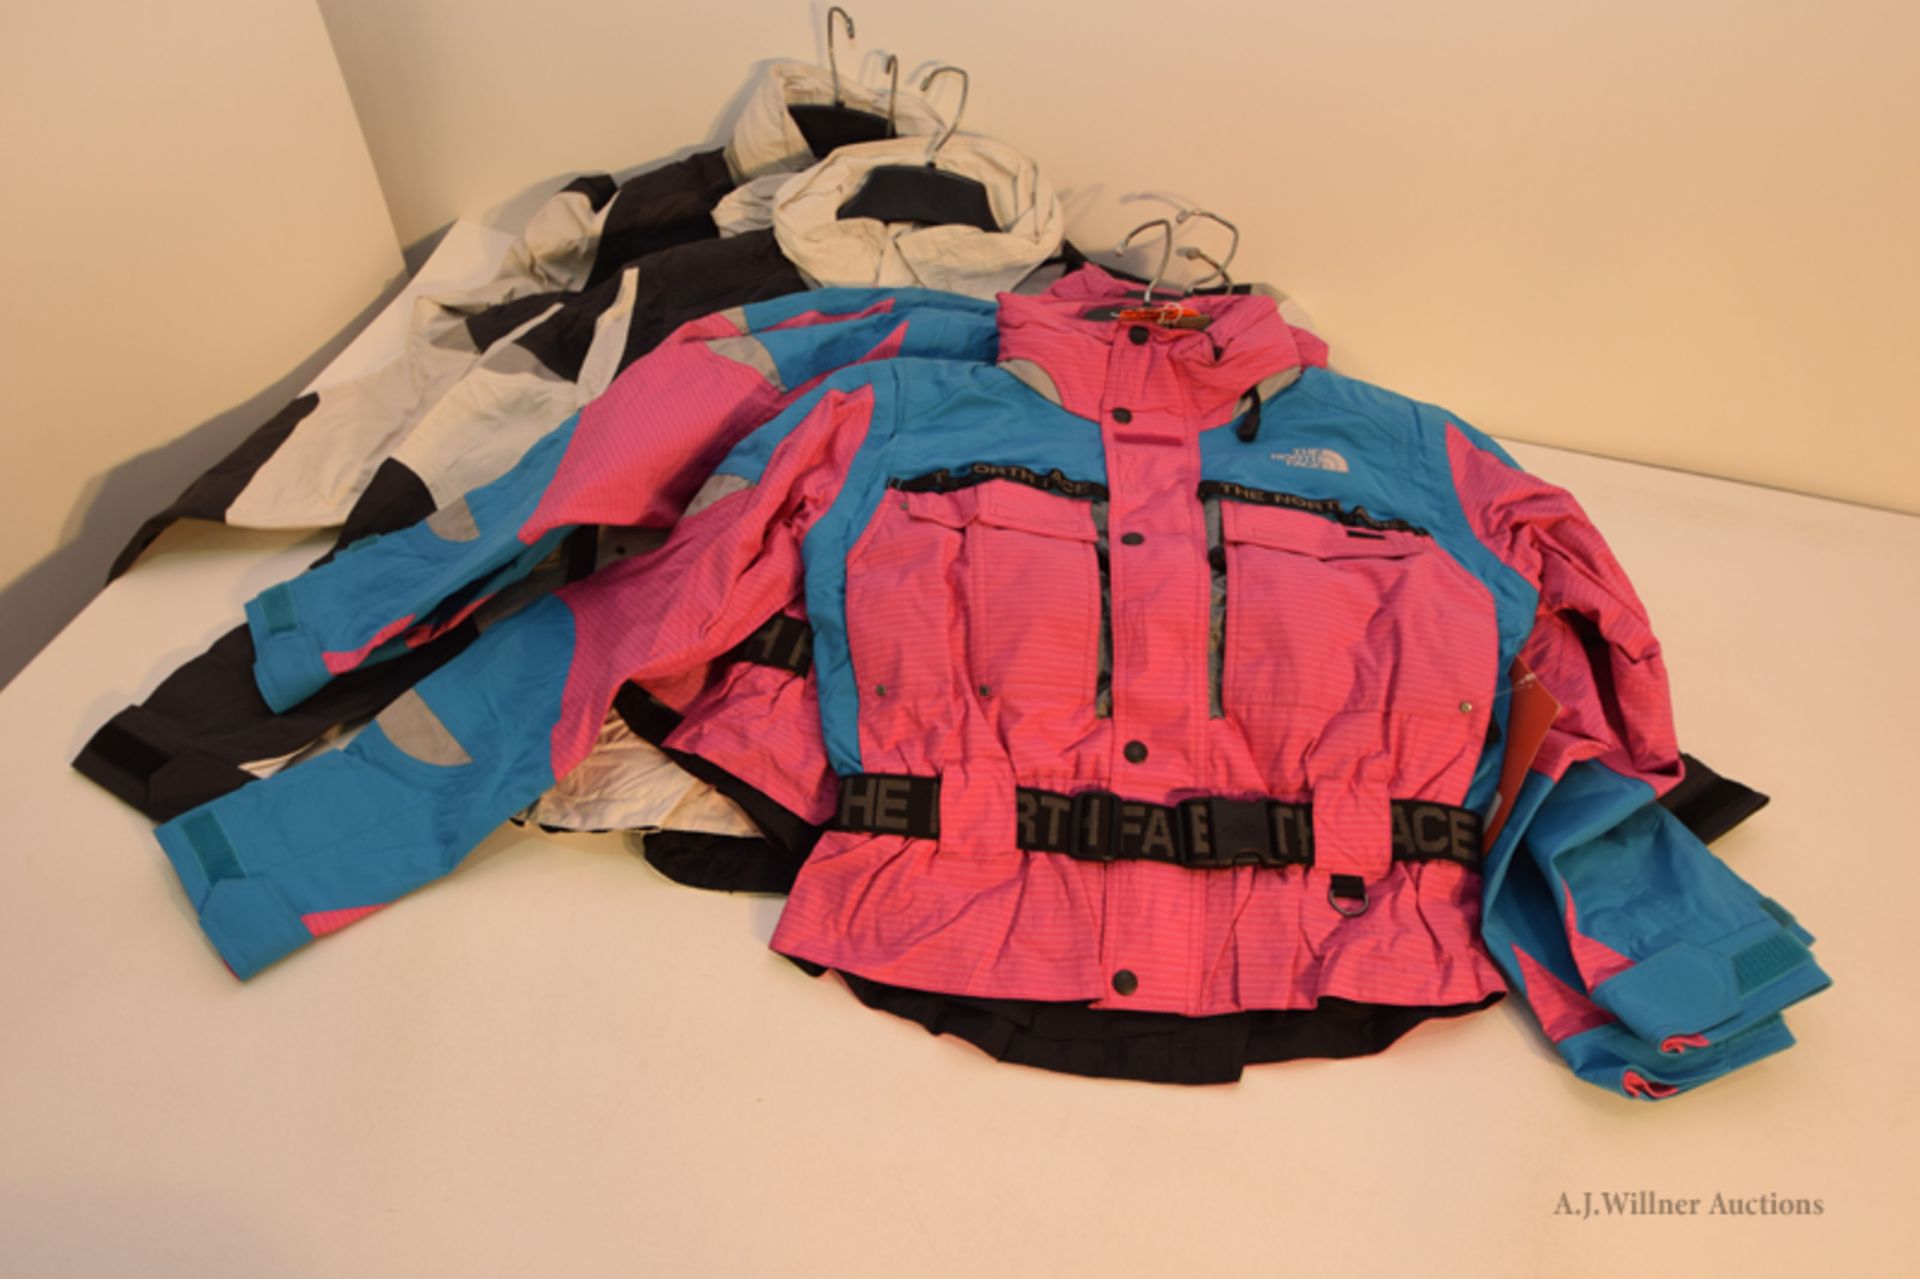 The North Face Clothing - Image 5 of 6